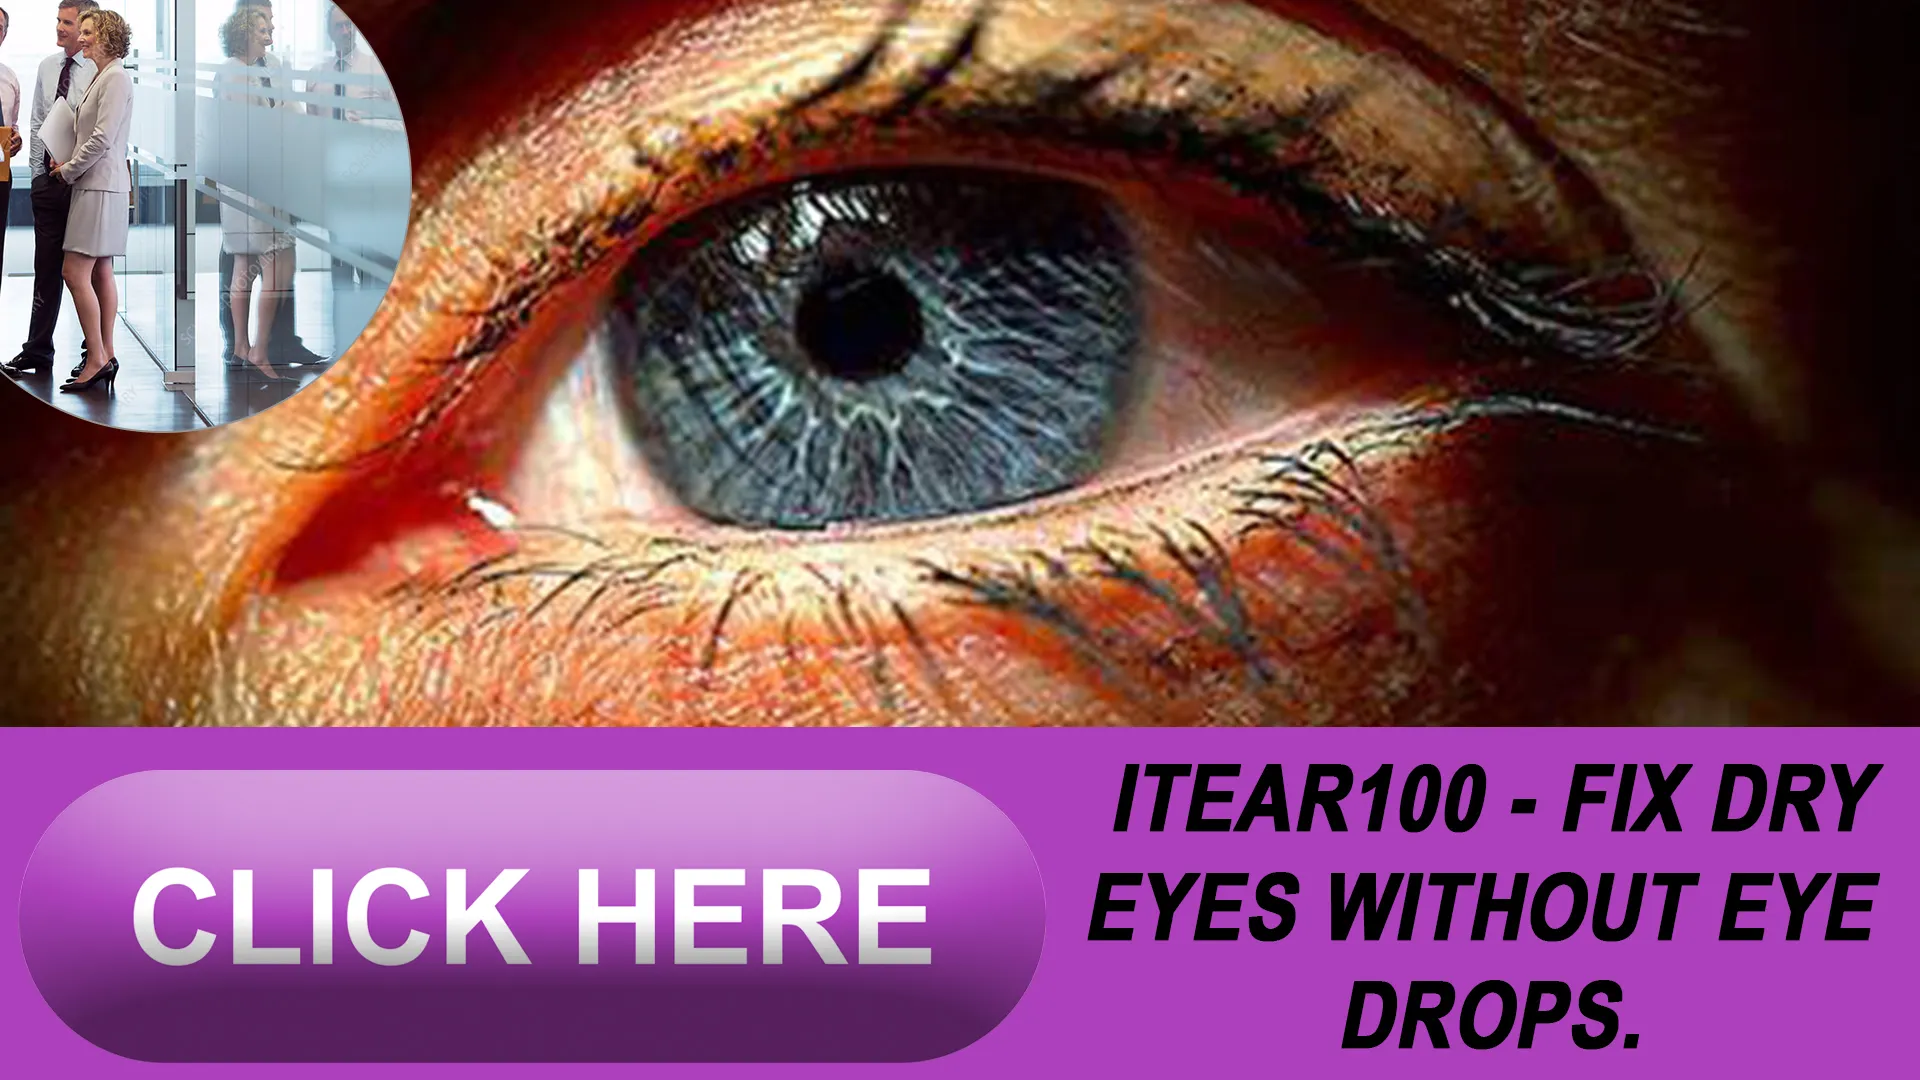 The Faces Behind iTear100: Meet the Team at Olympic Ophthalmics



